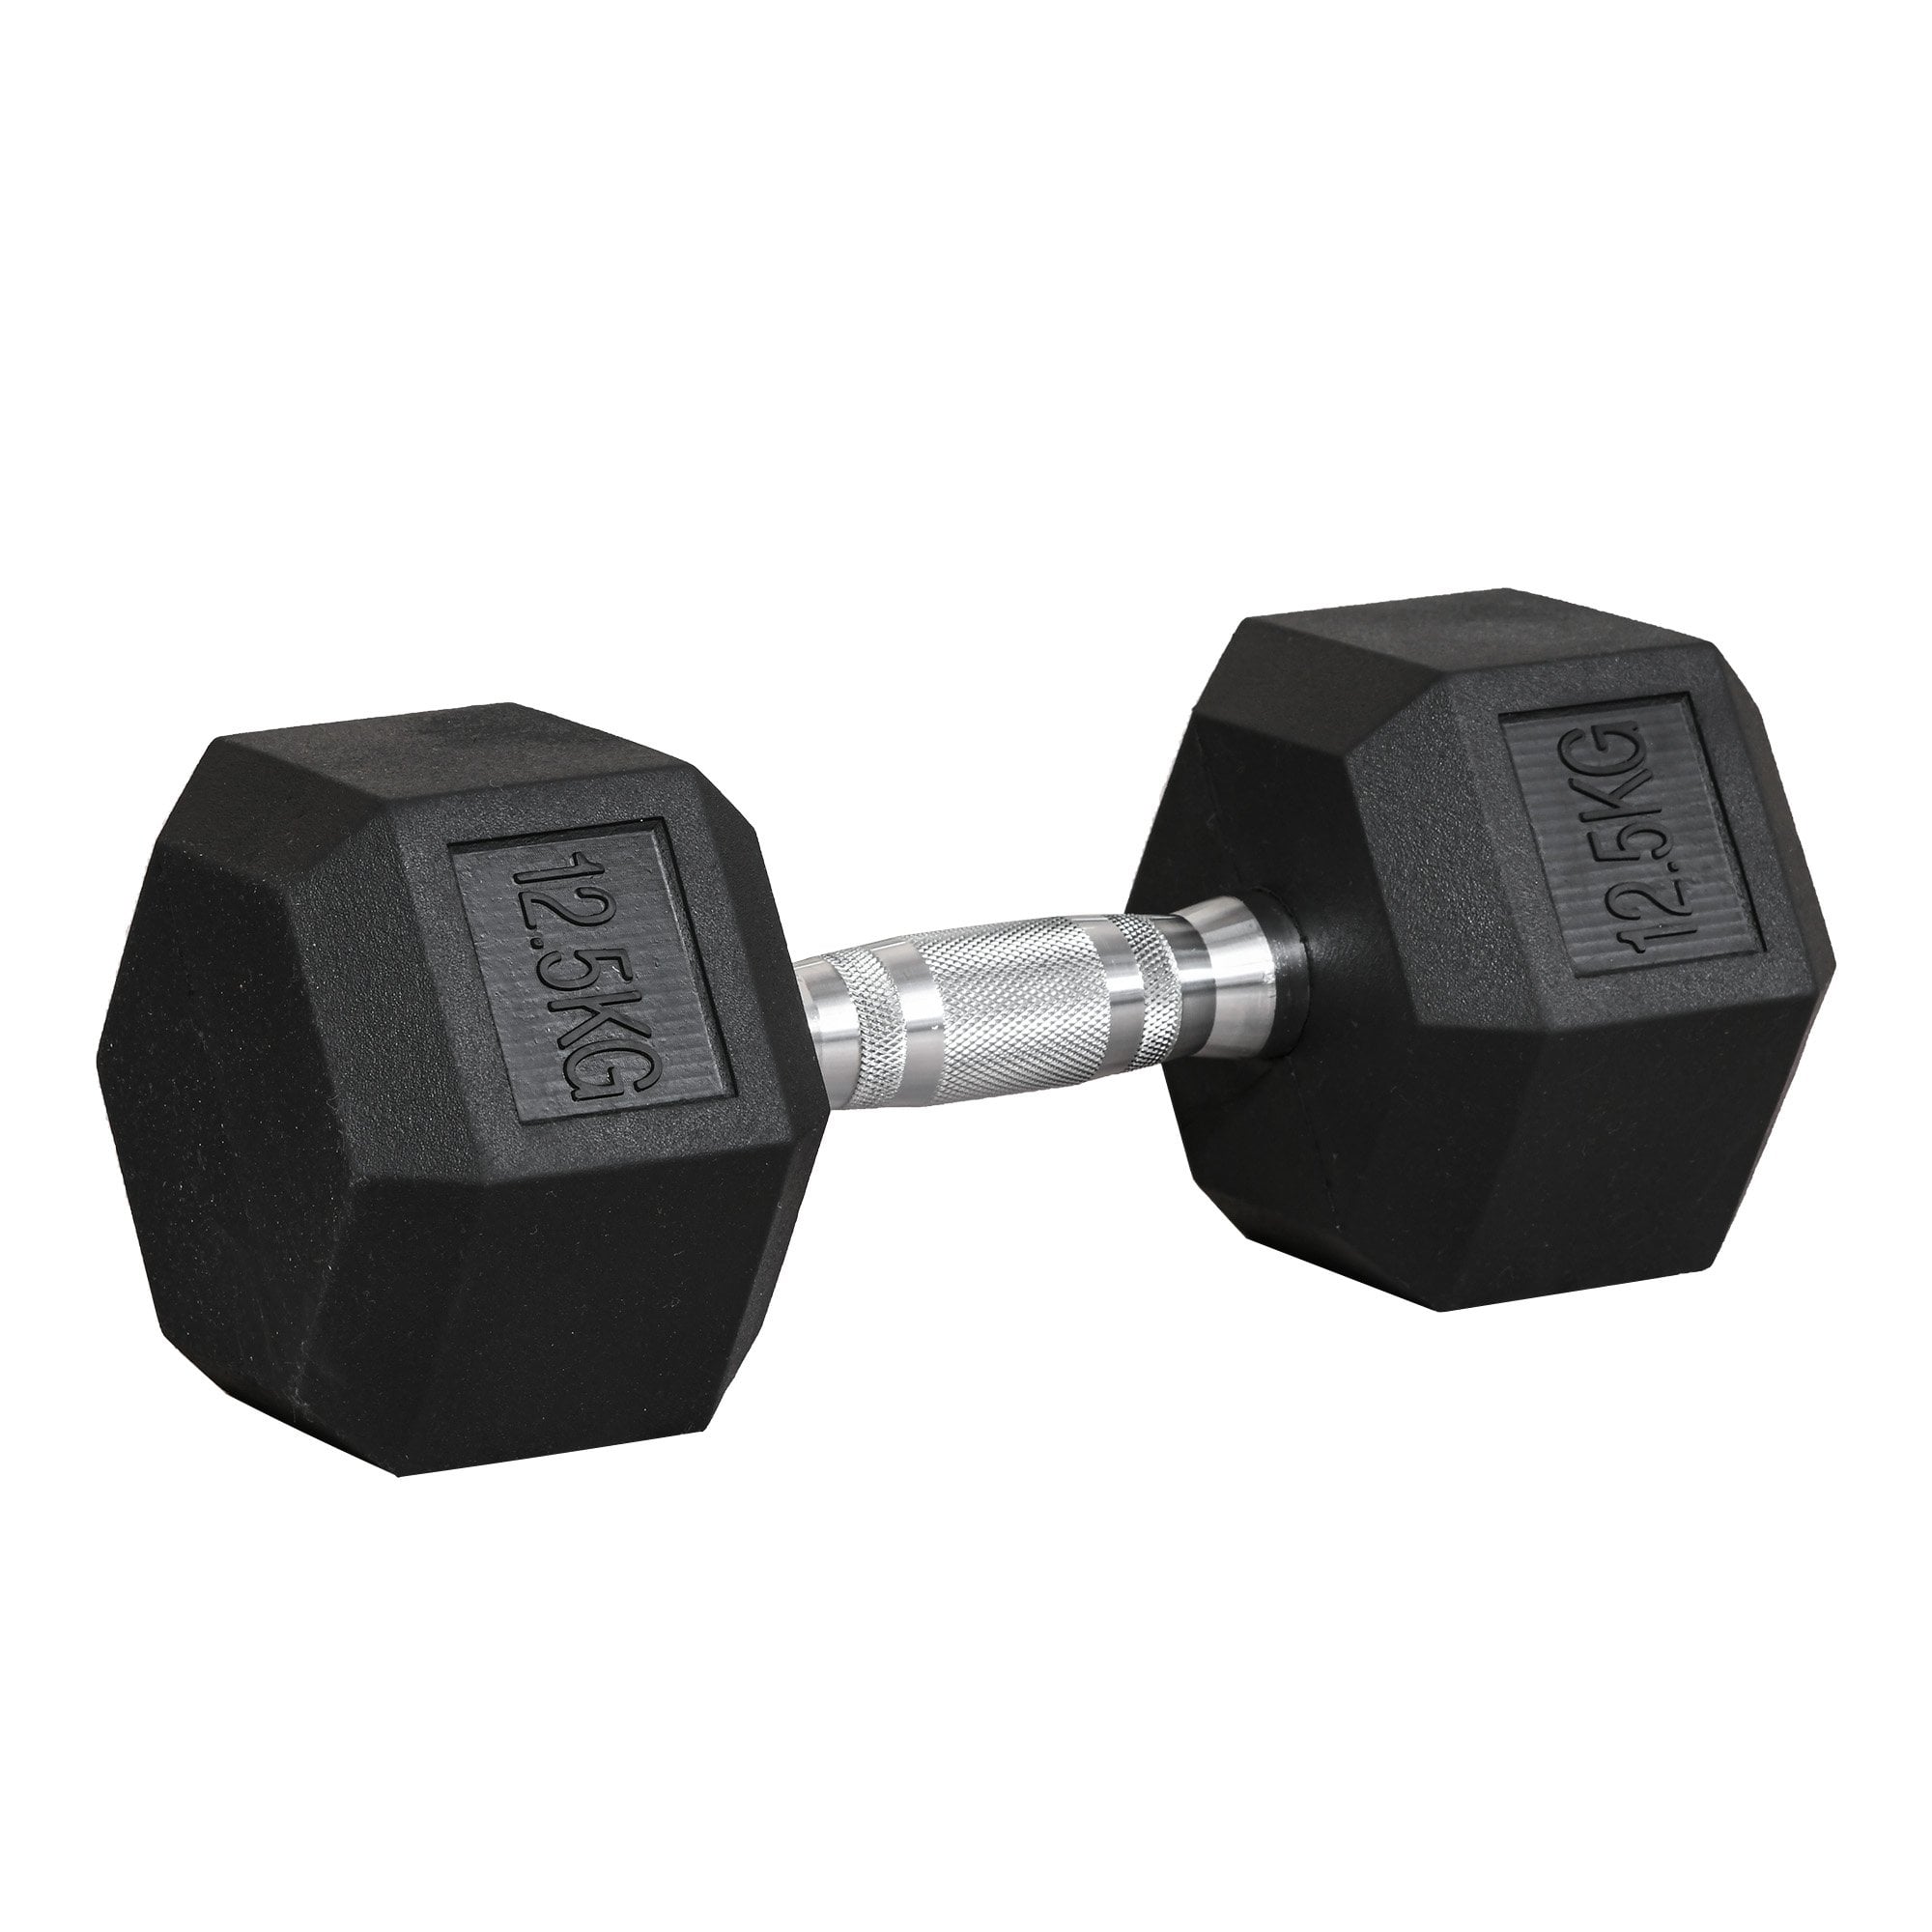 12.5KG Single Rubber Hex Dumbbell Portable Hand Weights Dumbbell Home Gym Workout Fitness Hand Dumbbell - MAXFIT  | TJ Hughes